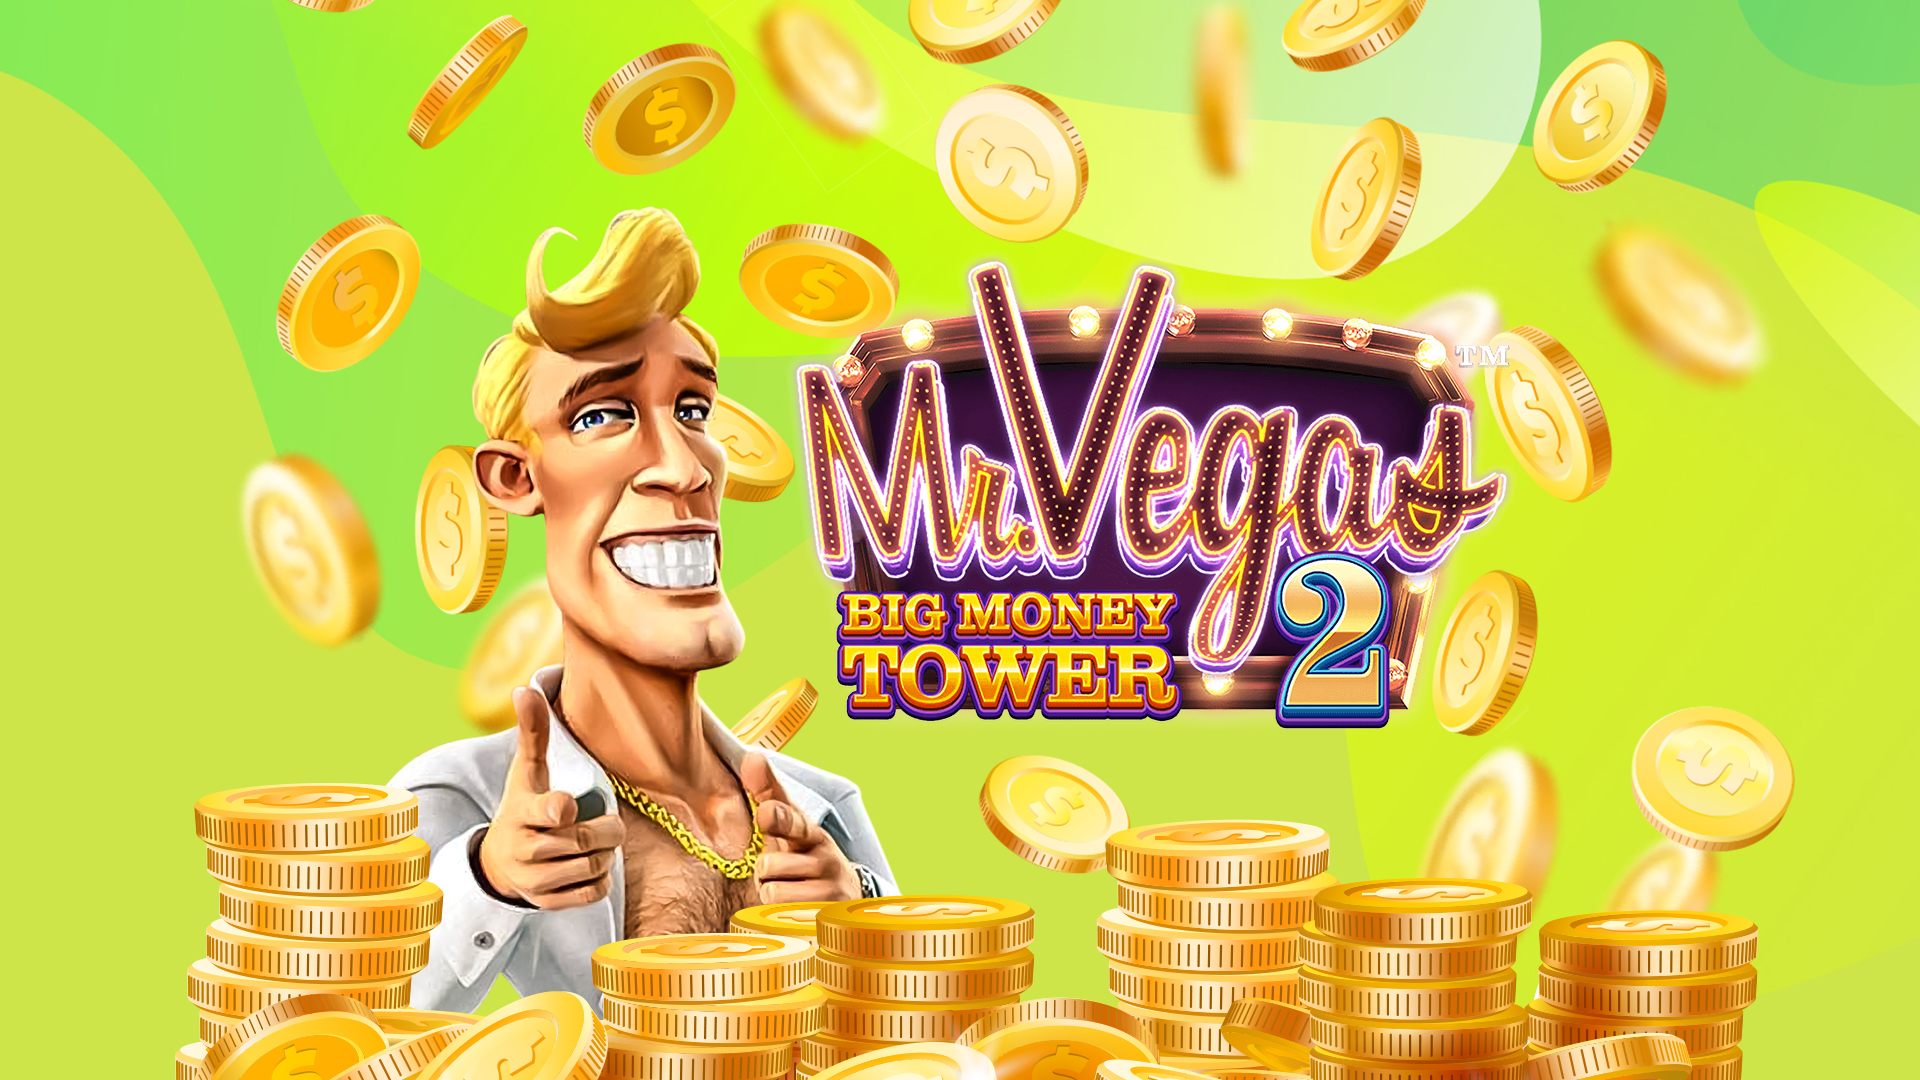 Mr Vegas points to the camera wearing an open shirt and a gold chain standing next to the logo Mr Vegas 2: Big Money Tower, surrounded by falling coins on a vibrant green background.